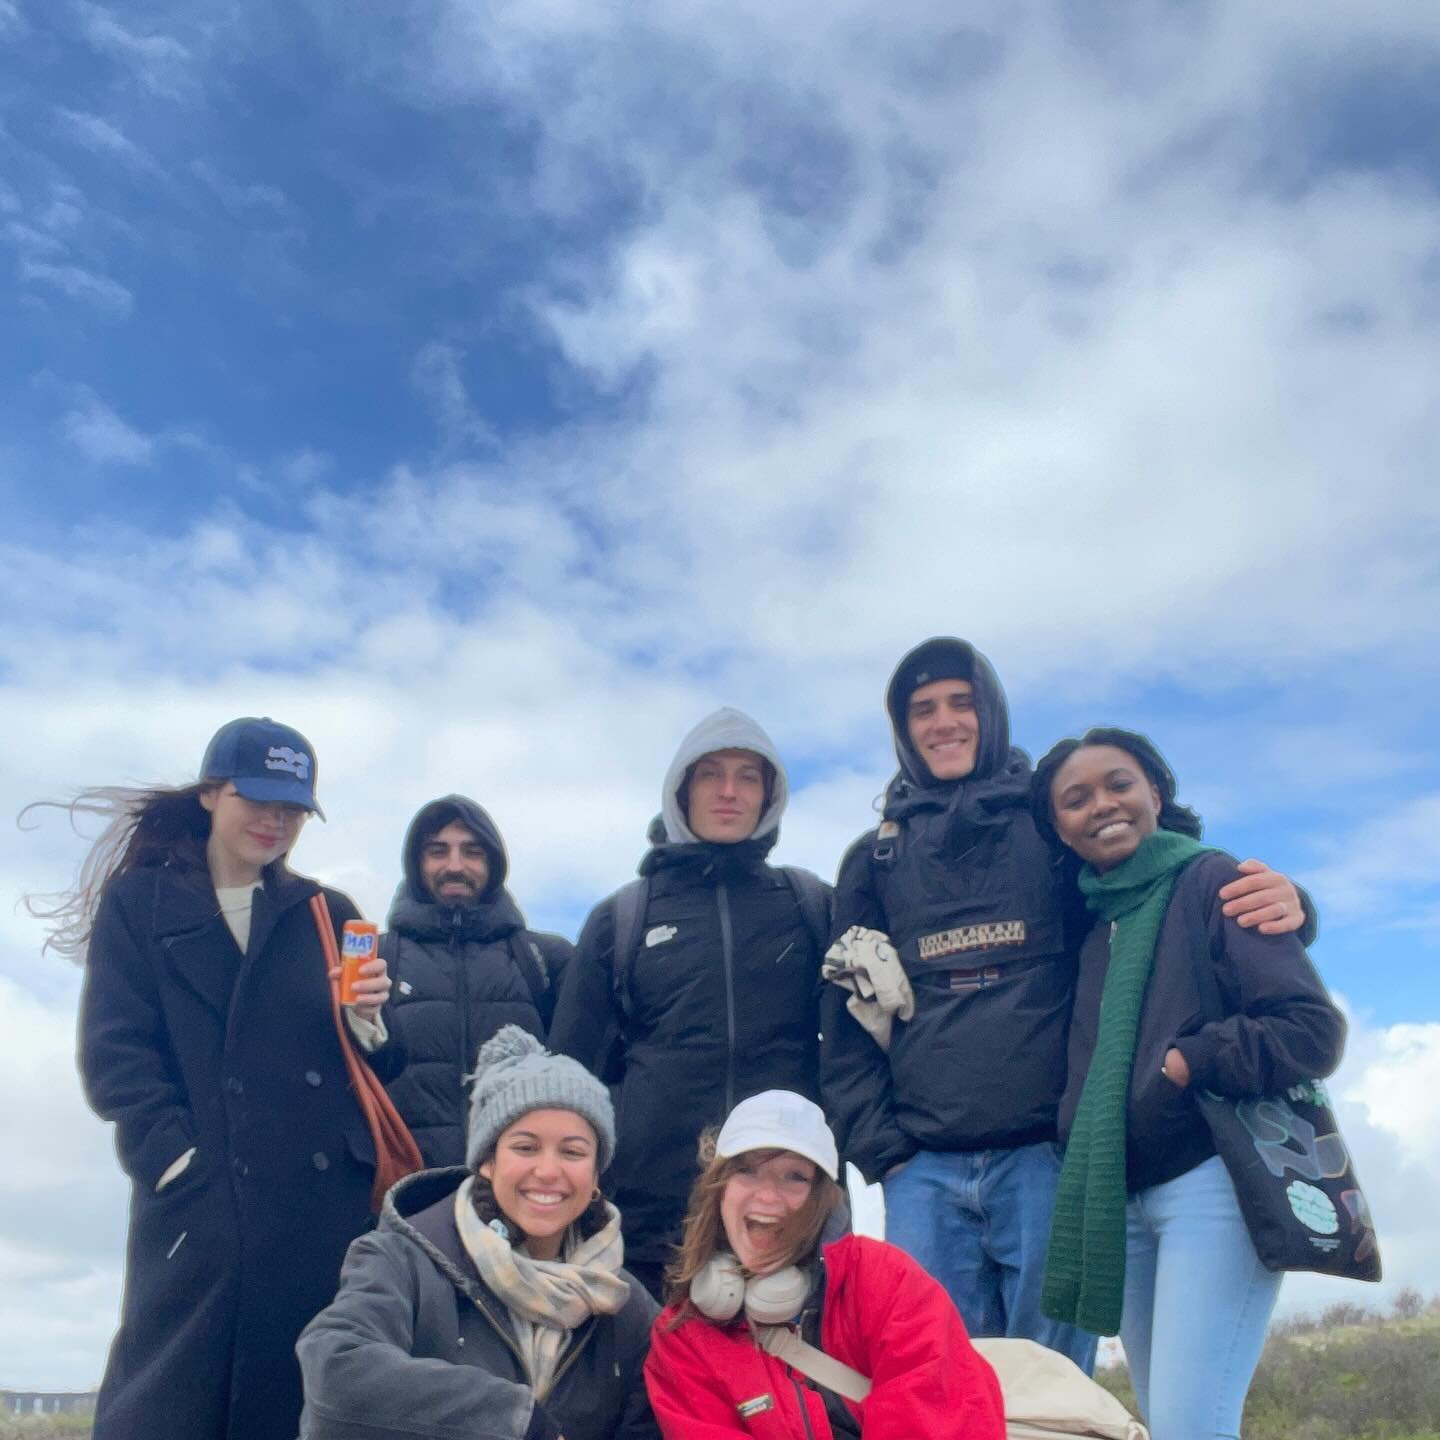 Last Saturday, we ventured to The Hague beach to connect with nature in honour of Earth Day 🌍🏝️
It was a wonderful opportunity for us to do our part to give back to the community while discussing the topic of environmentalism and how we can take ac